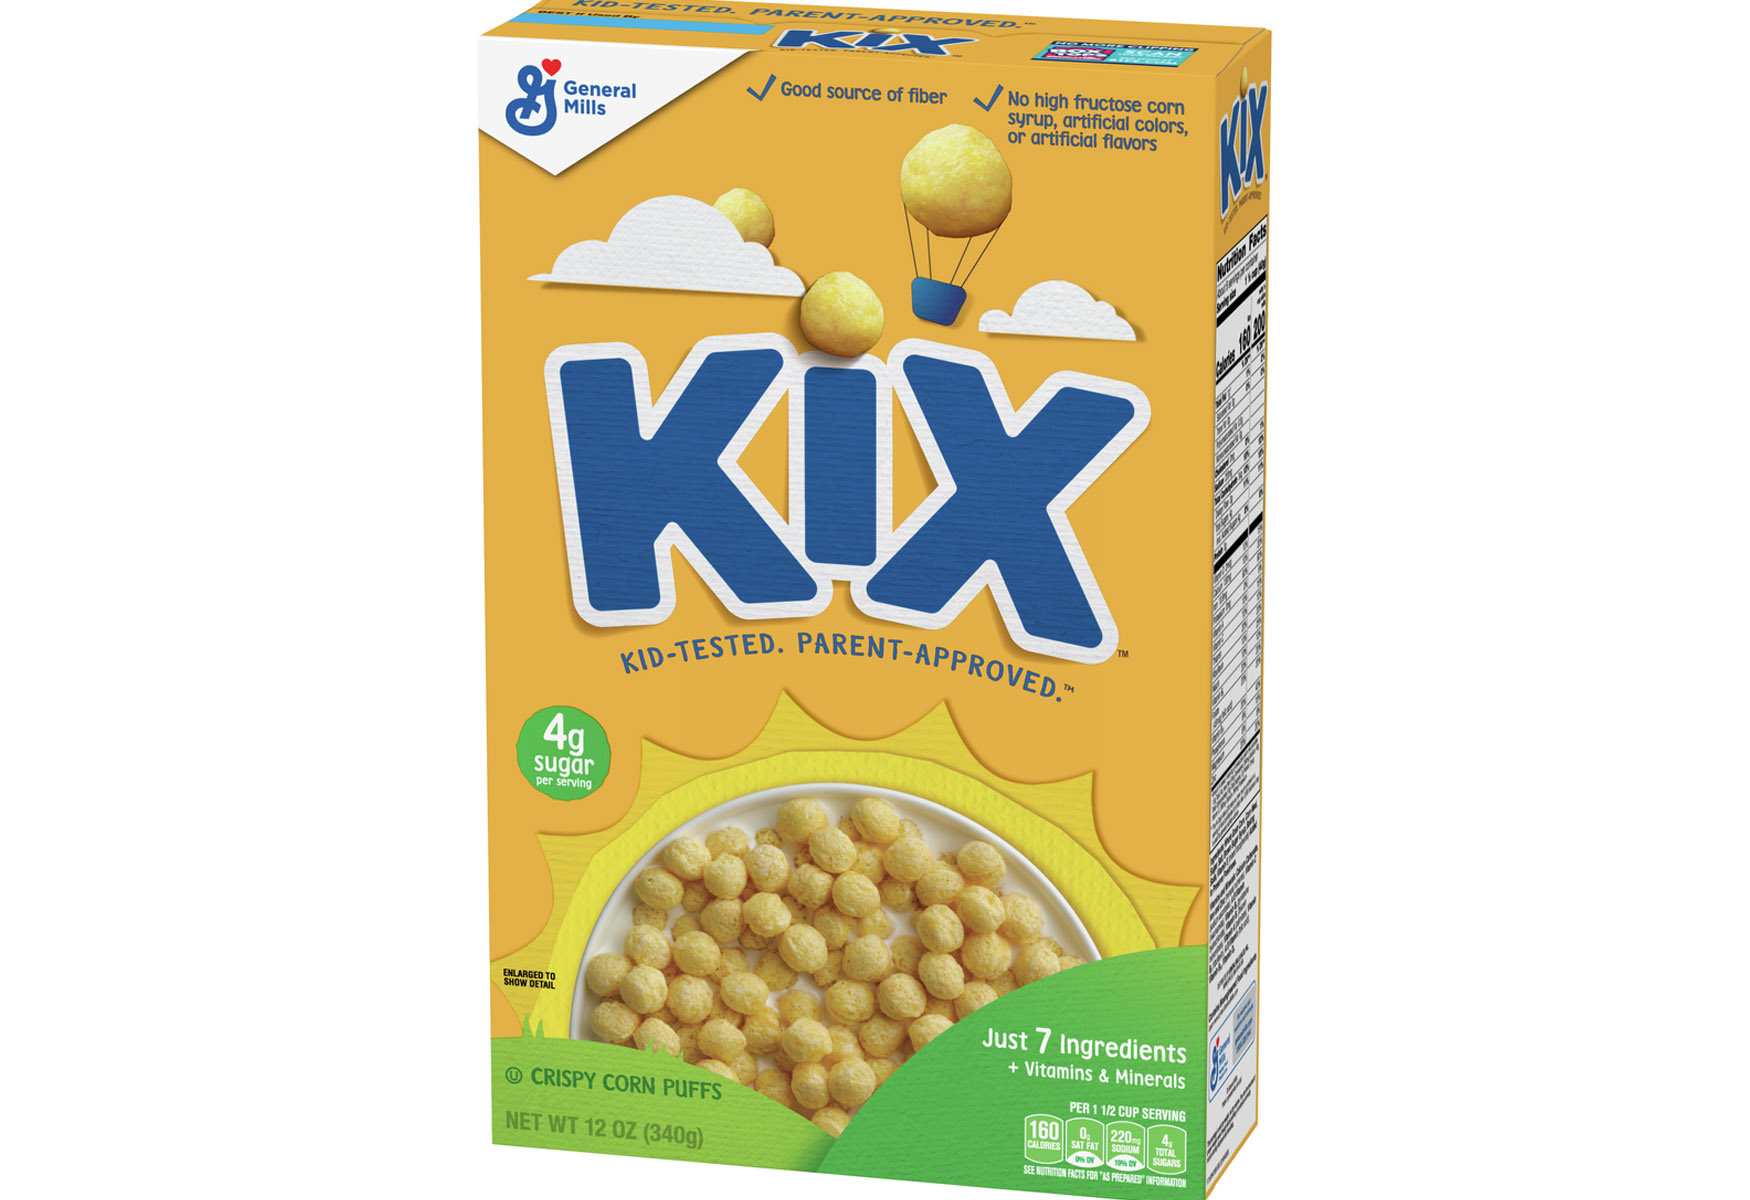 10-kix-cereal-nutrition-facts